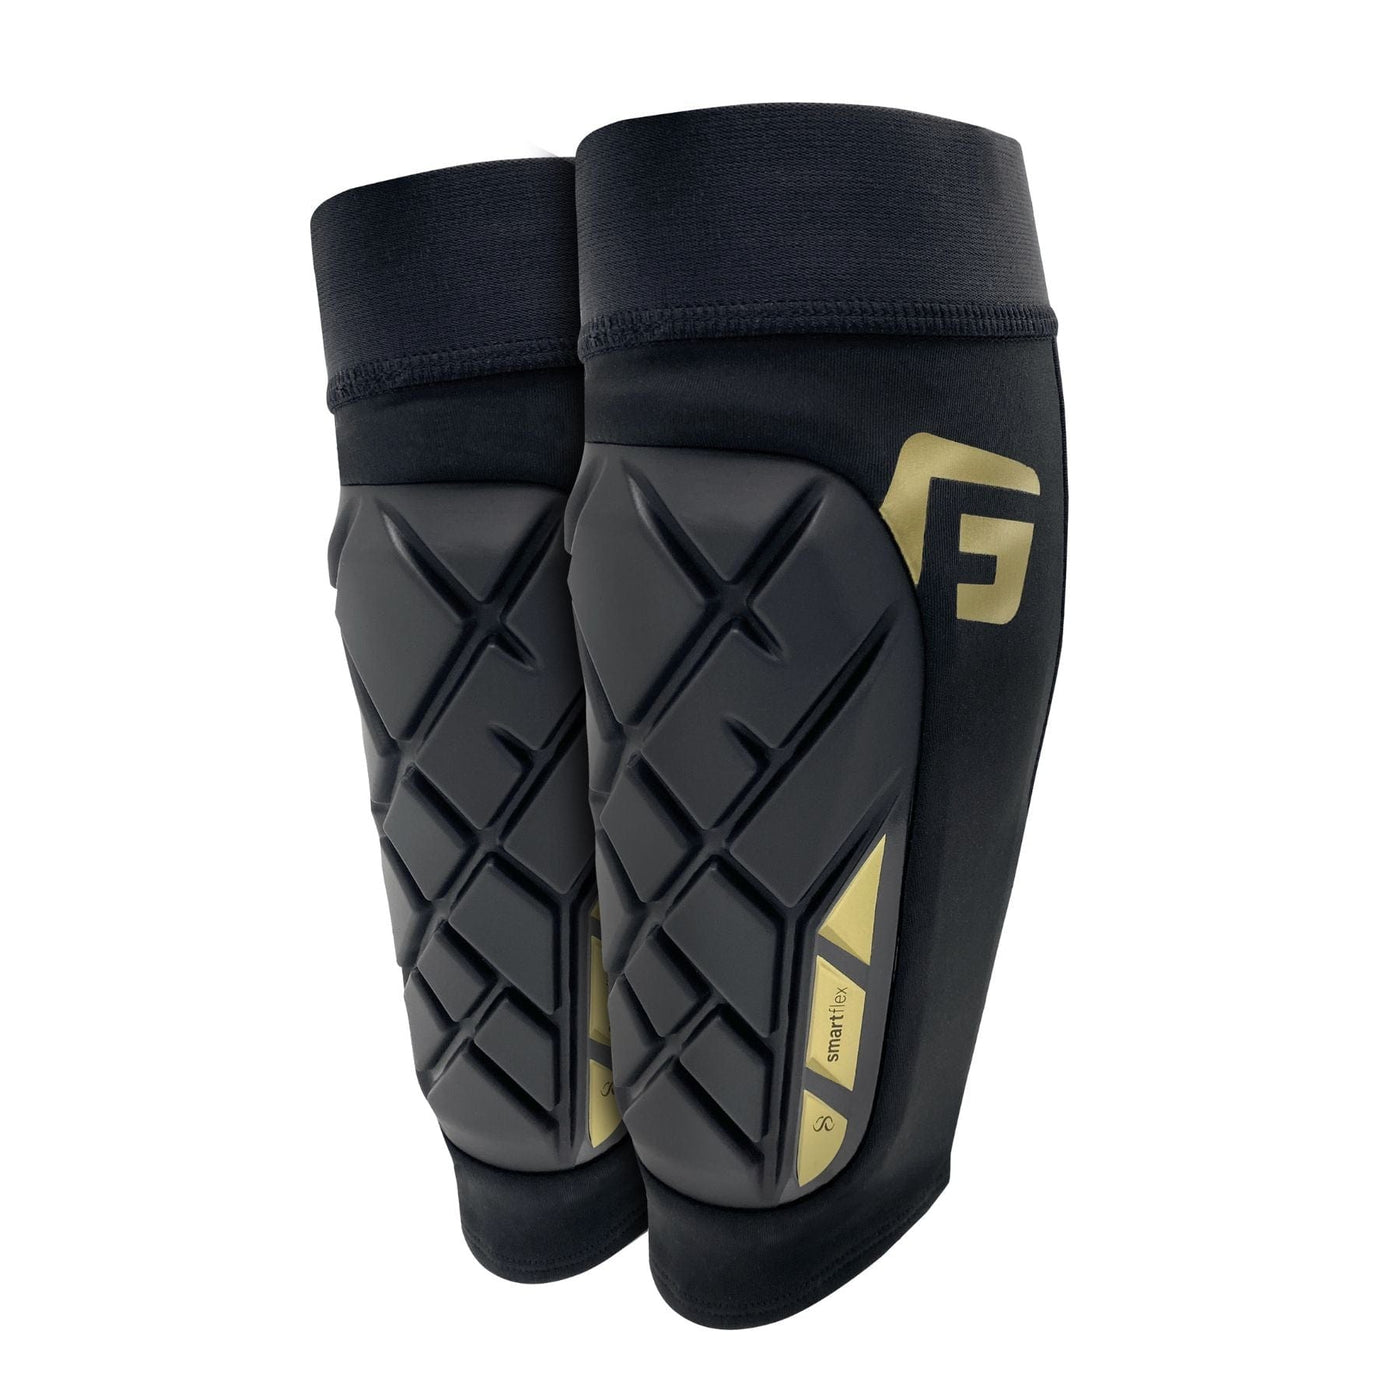 G-Form Shin Guards for Football Pro-S Elite X - Matte Black 8Lines Shop - Fast Shipping